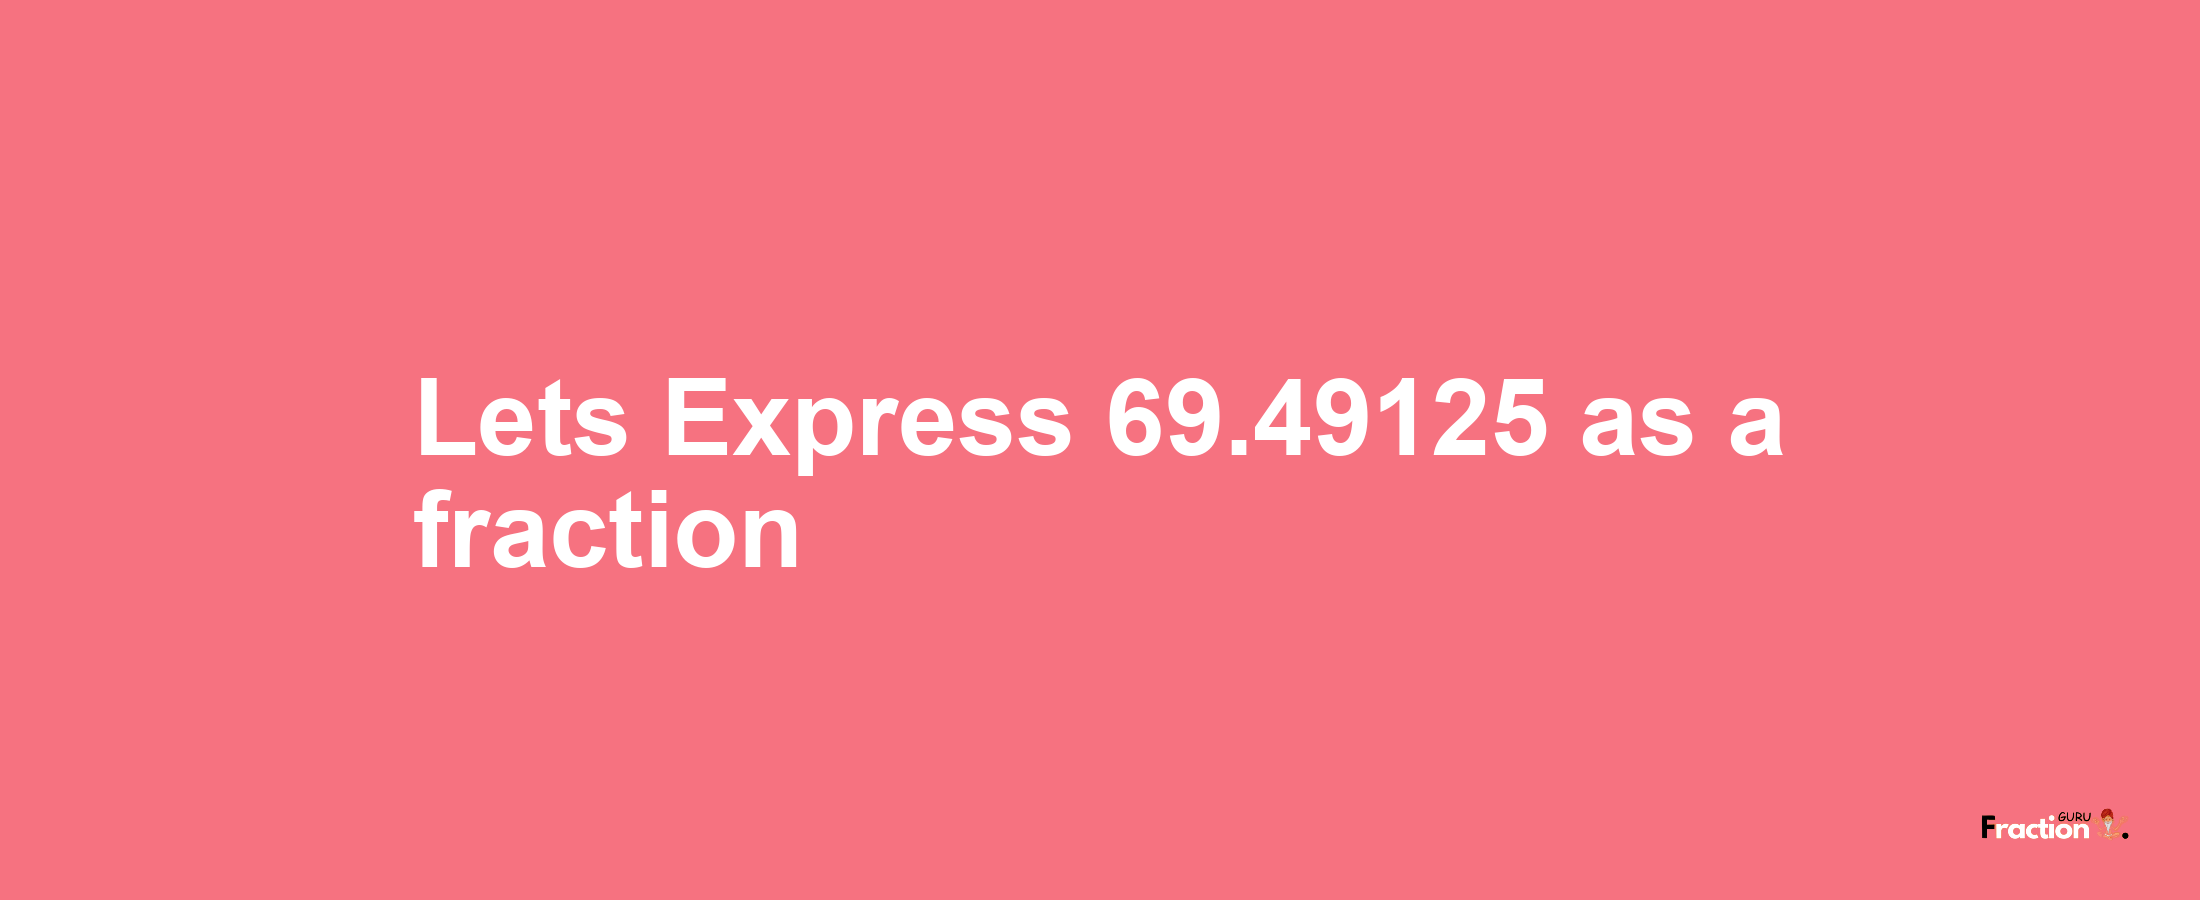 Lets Express 69.49125 as afraction